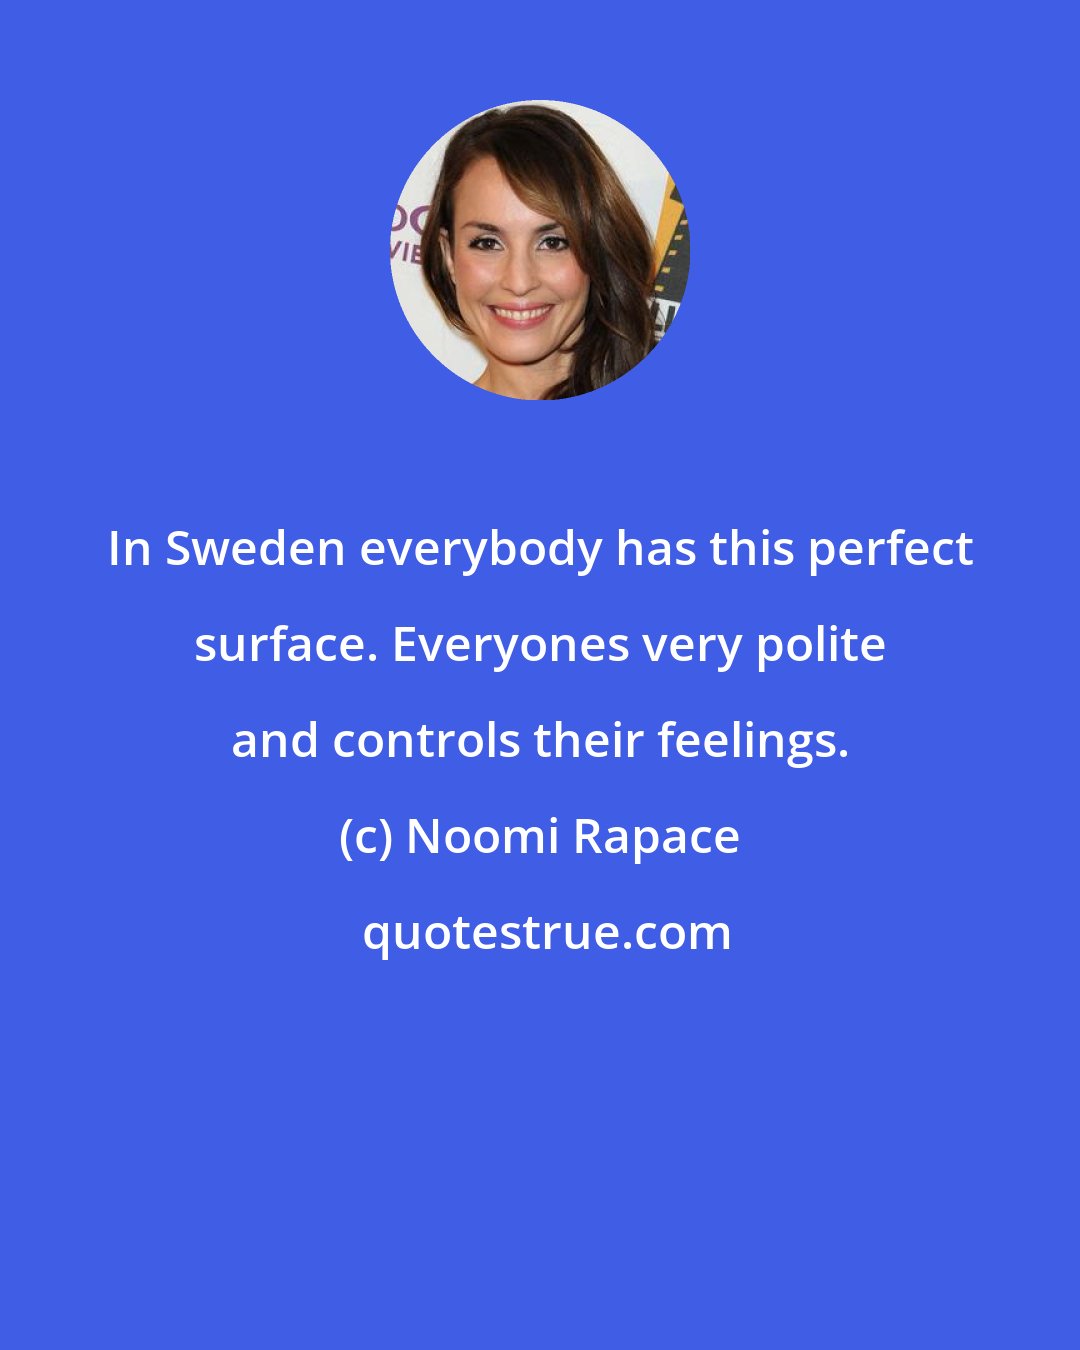 Noomi Rapace: In Sweden everybody has this perfect surface. Everyones very polite and controls their feelings.